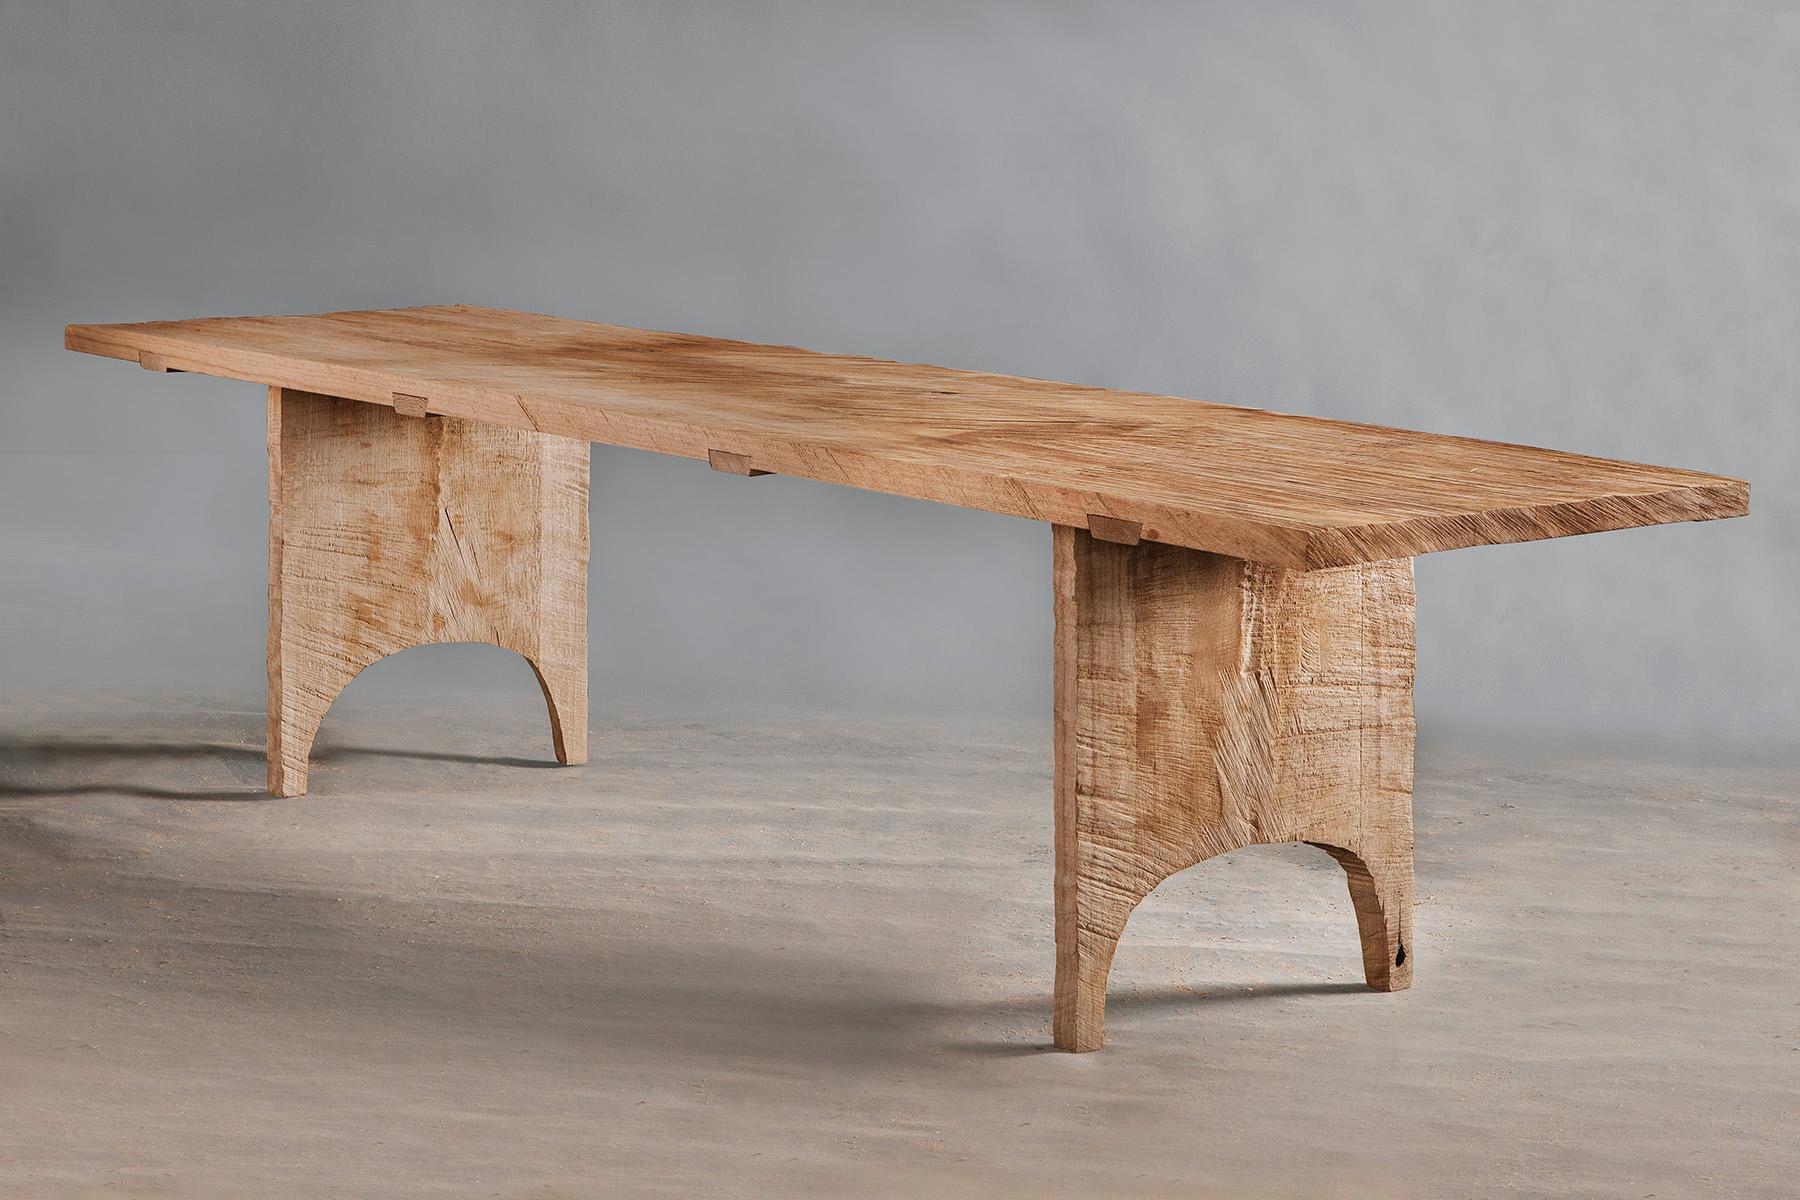 Dining table of solid oak (+ linseed oil)
(Outdoor use OK)

Custom size: 11'L x 44